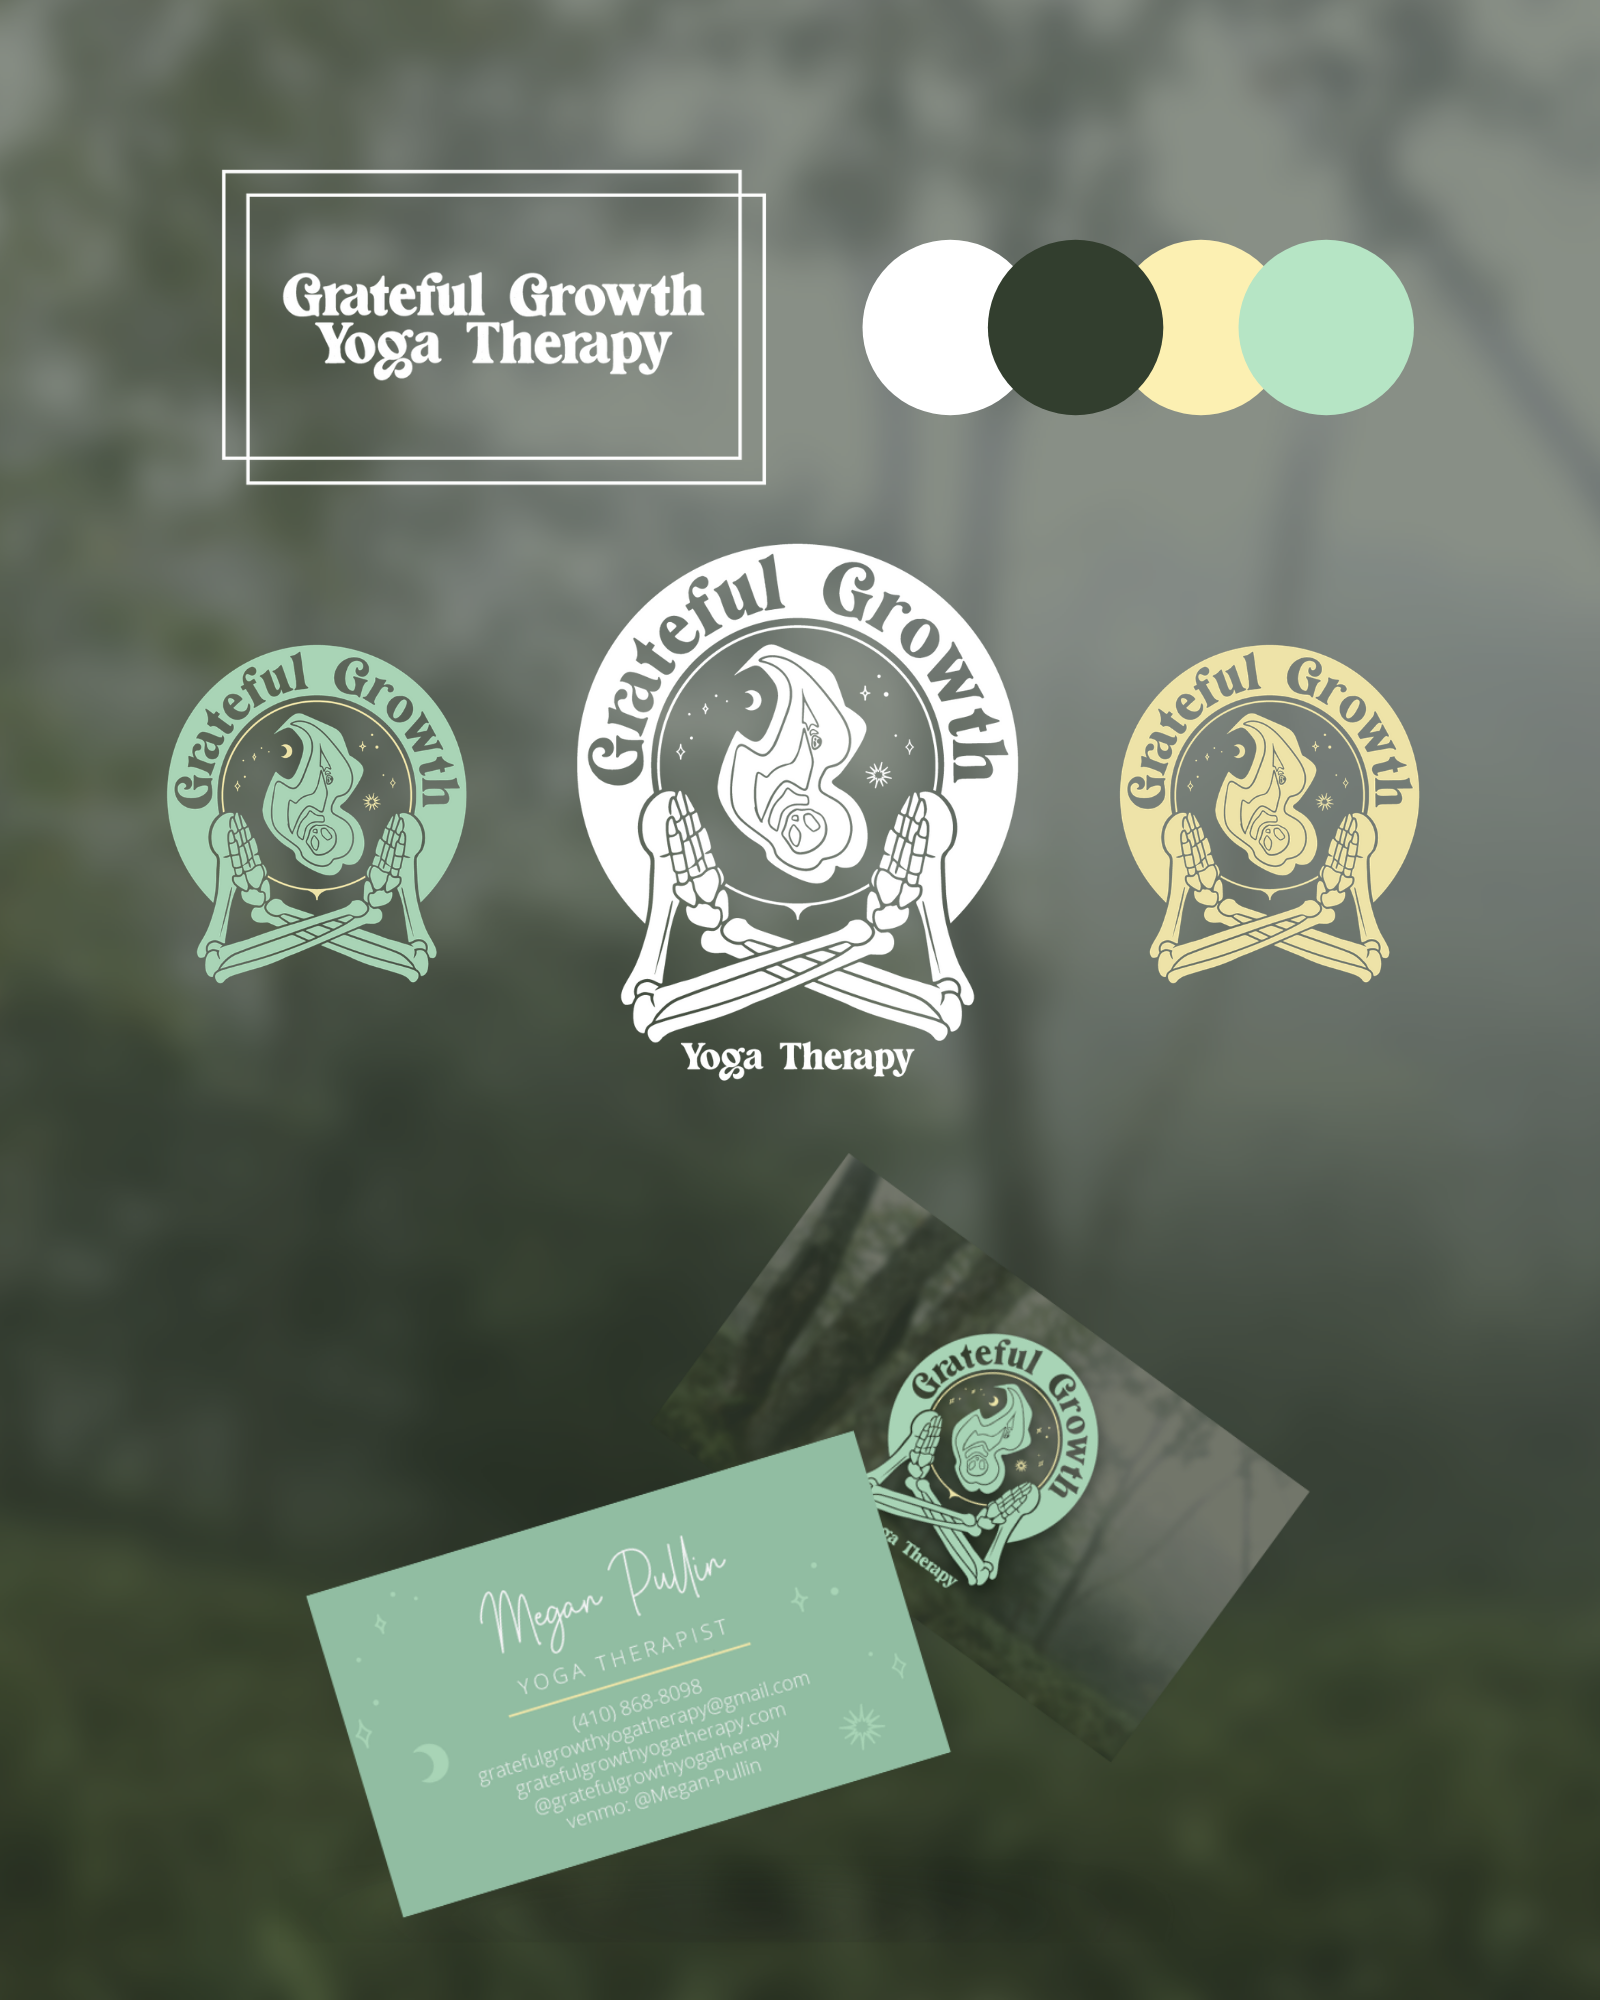 Grateful Growth Yoga Therapy Logo and Branding Design